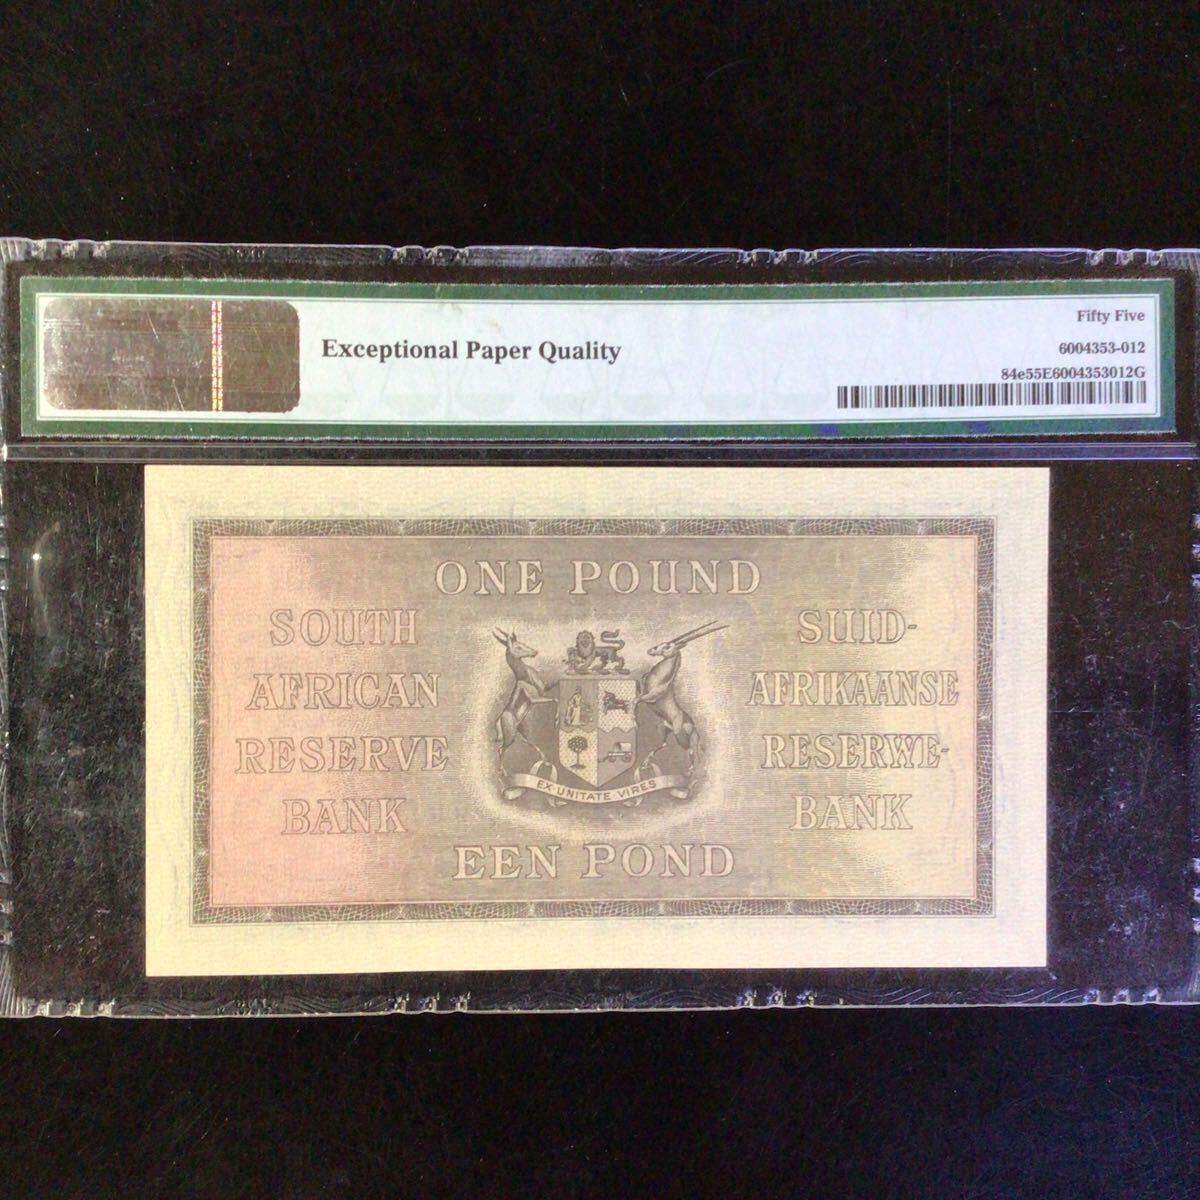 World Banknote Grading SOUTH AFRICA《Reserve Bank》1 Pound【1942】『PMG Grading About Uncirculated 55 EPQ』._画像2